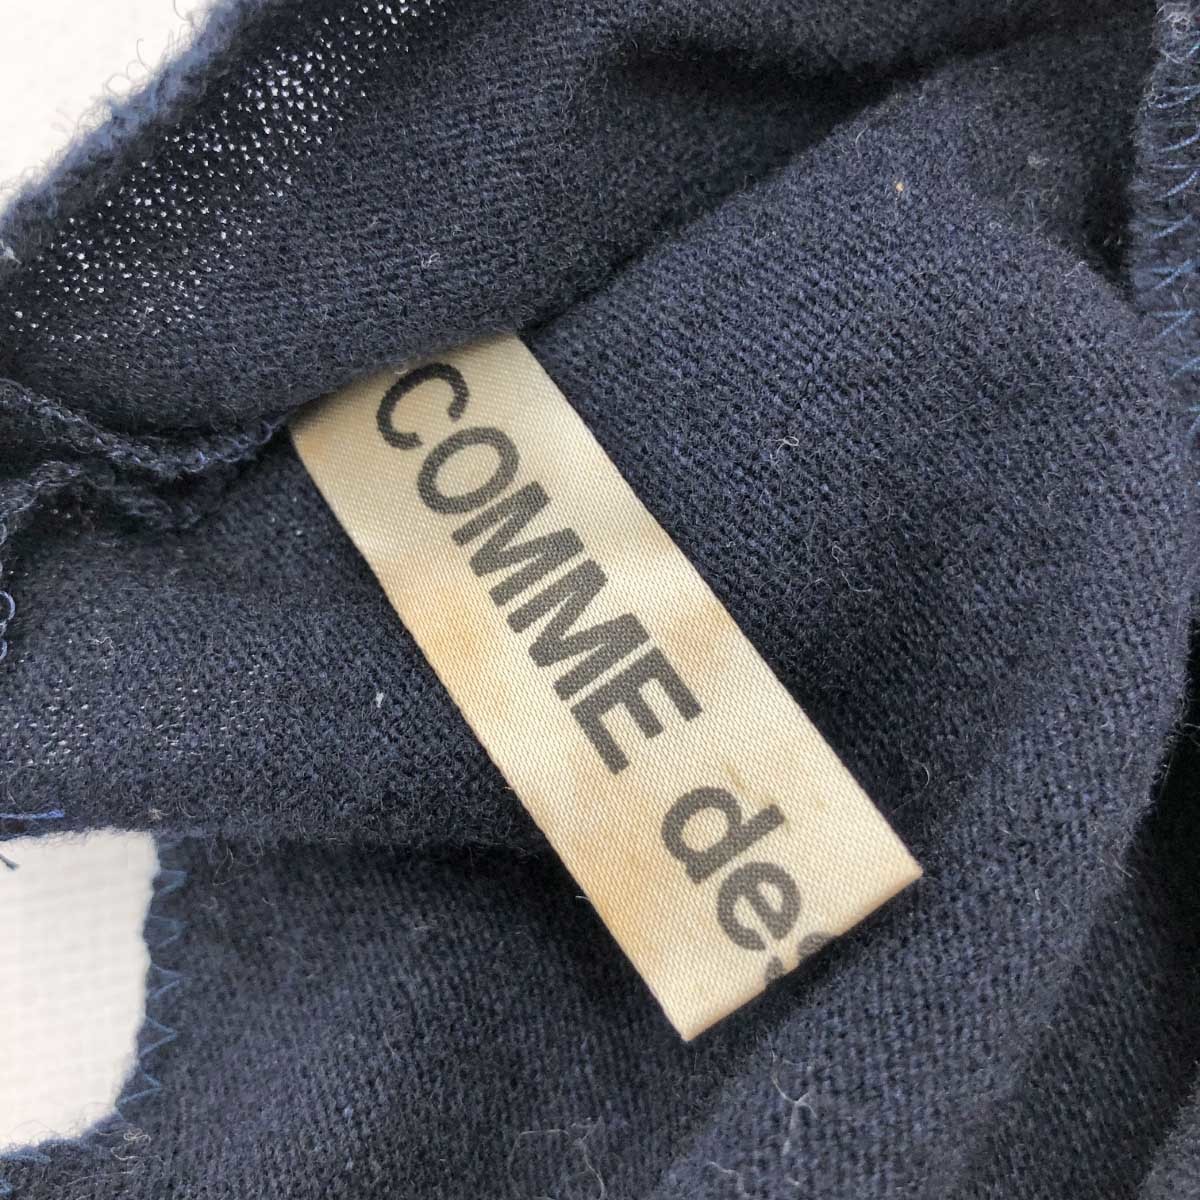 *COMME des GARCONS Comme des Garcons long sleeve knitted *GB-050200 navy wool lady's tops cut off Vintage 